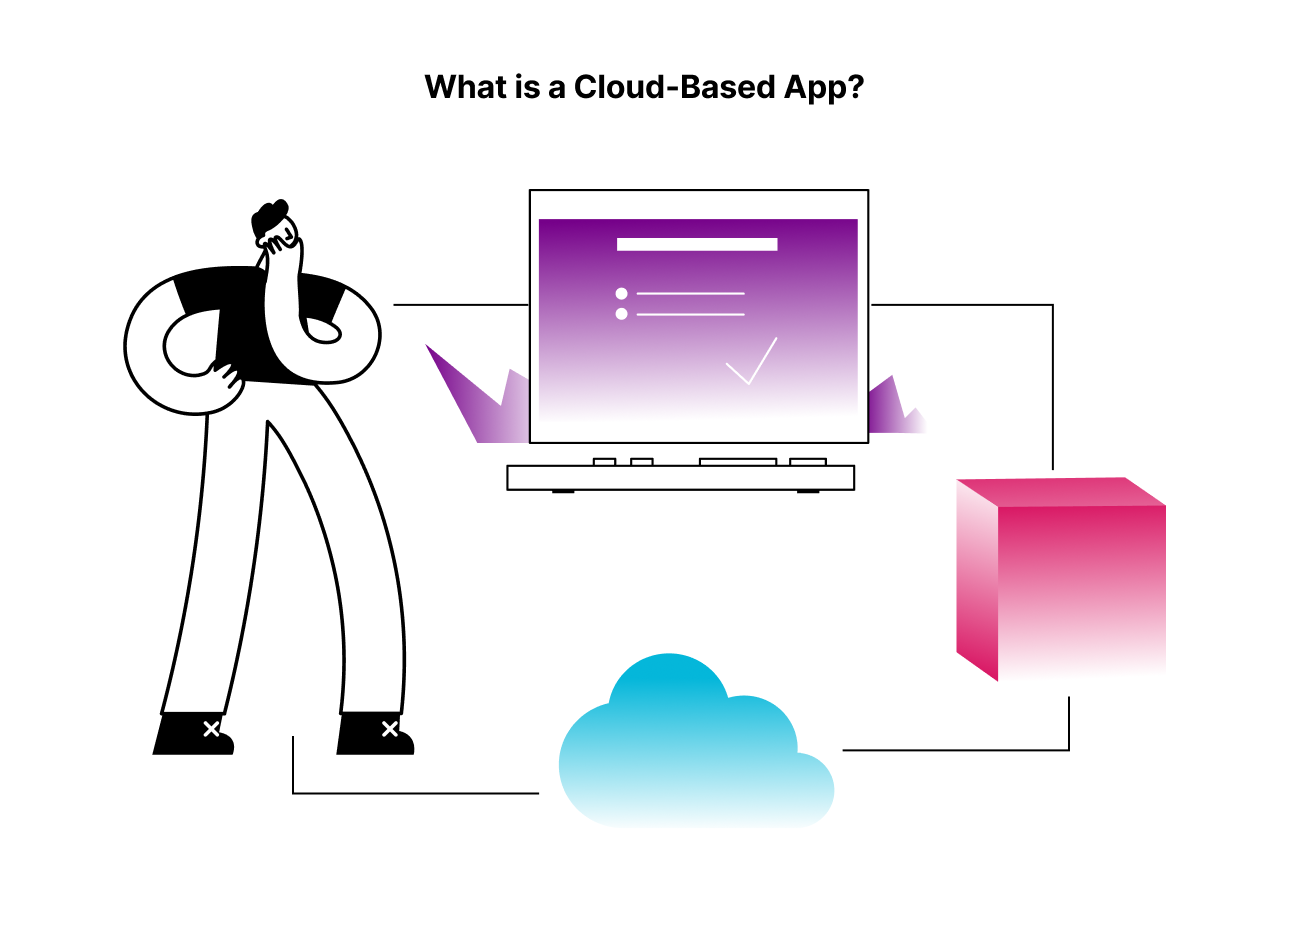 What Is a Cloud-based App?